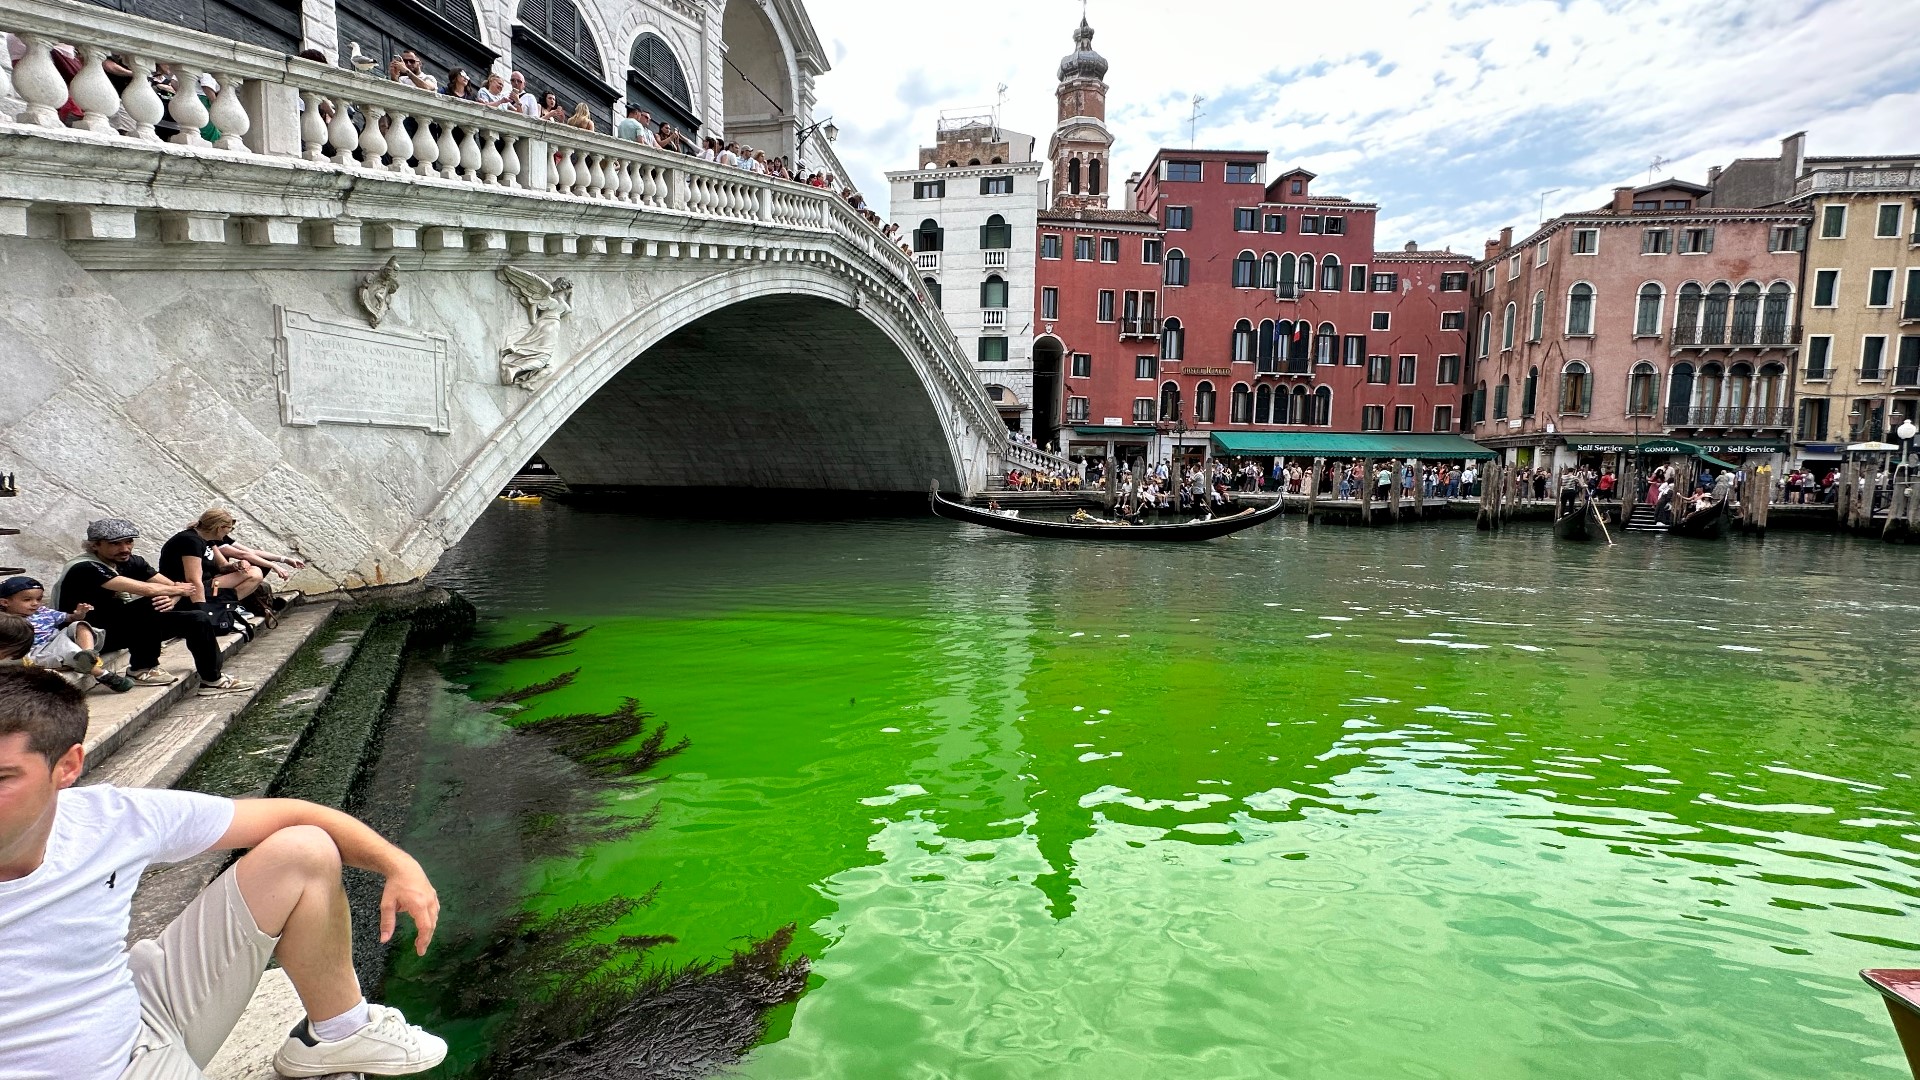 Italian police are investigating the source of a phosphorescent green liquid patch that appeared in the Grand Canal in Venice.